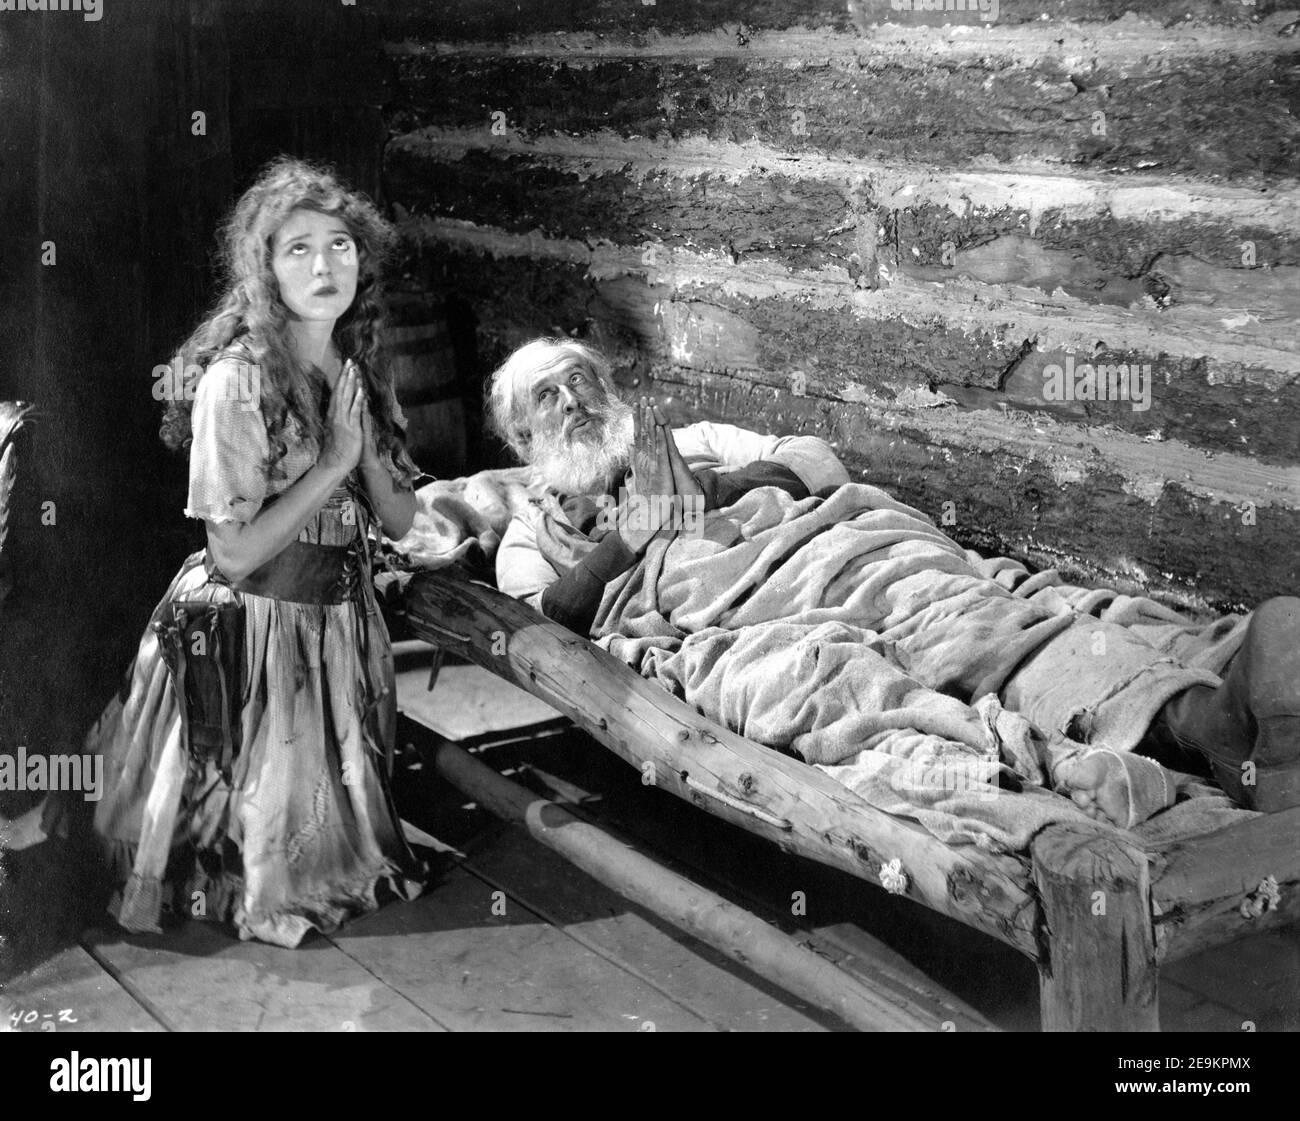 MARY PICKFORD and THEODORE ROBERTS in M'LISS 1918 director MARSHALL NEILAN story Bret Harte scenario Frances Marion Pickford Film / Artcraft Pictures Corporation / Paramount Pictures Stock Photo